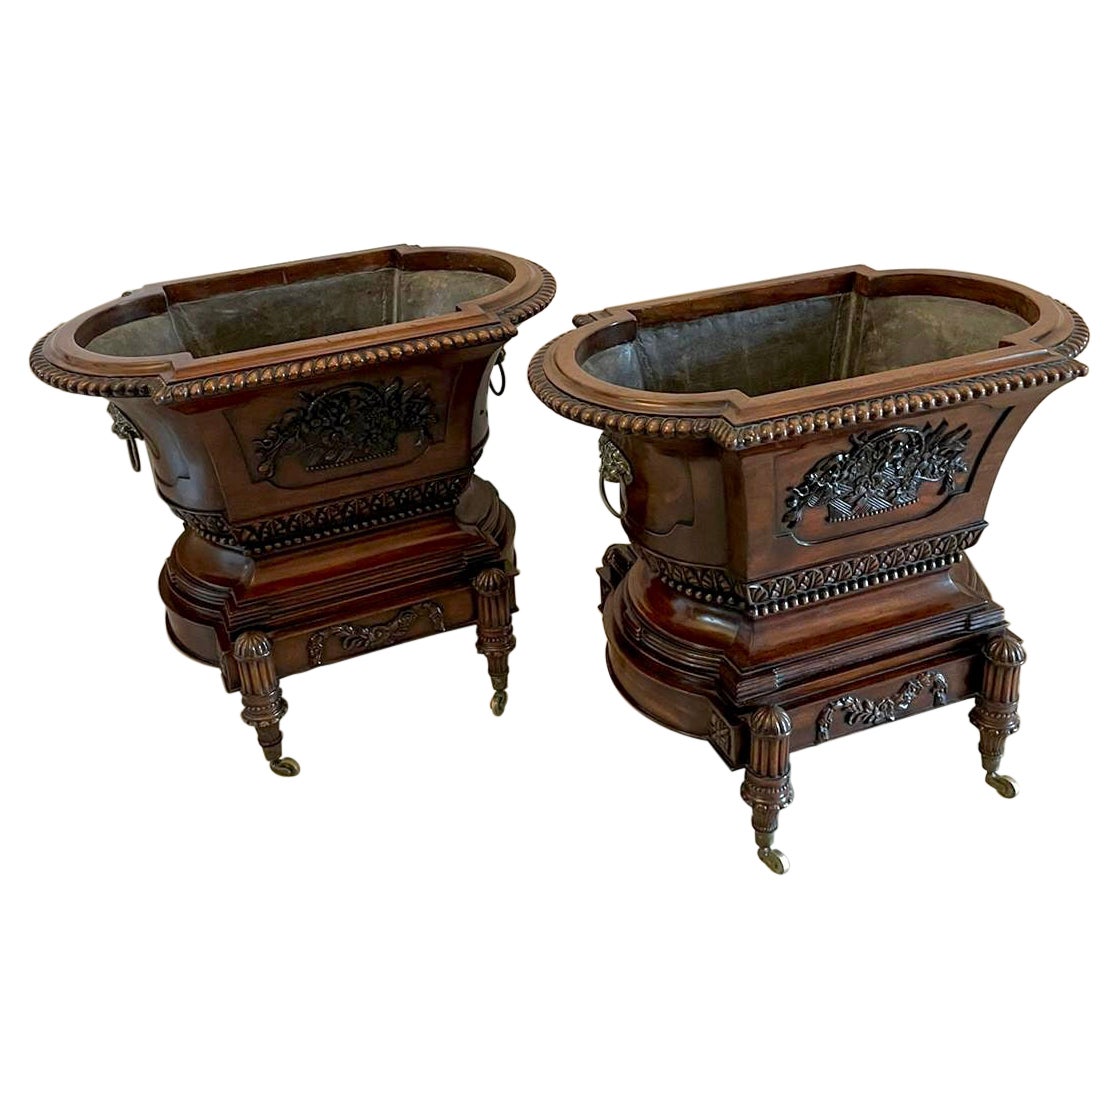 Outstanding Quality Pair of Antique Freestanding Carved Mahogany Wine Coolers For Sale